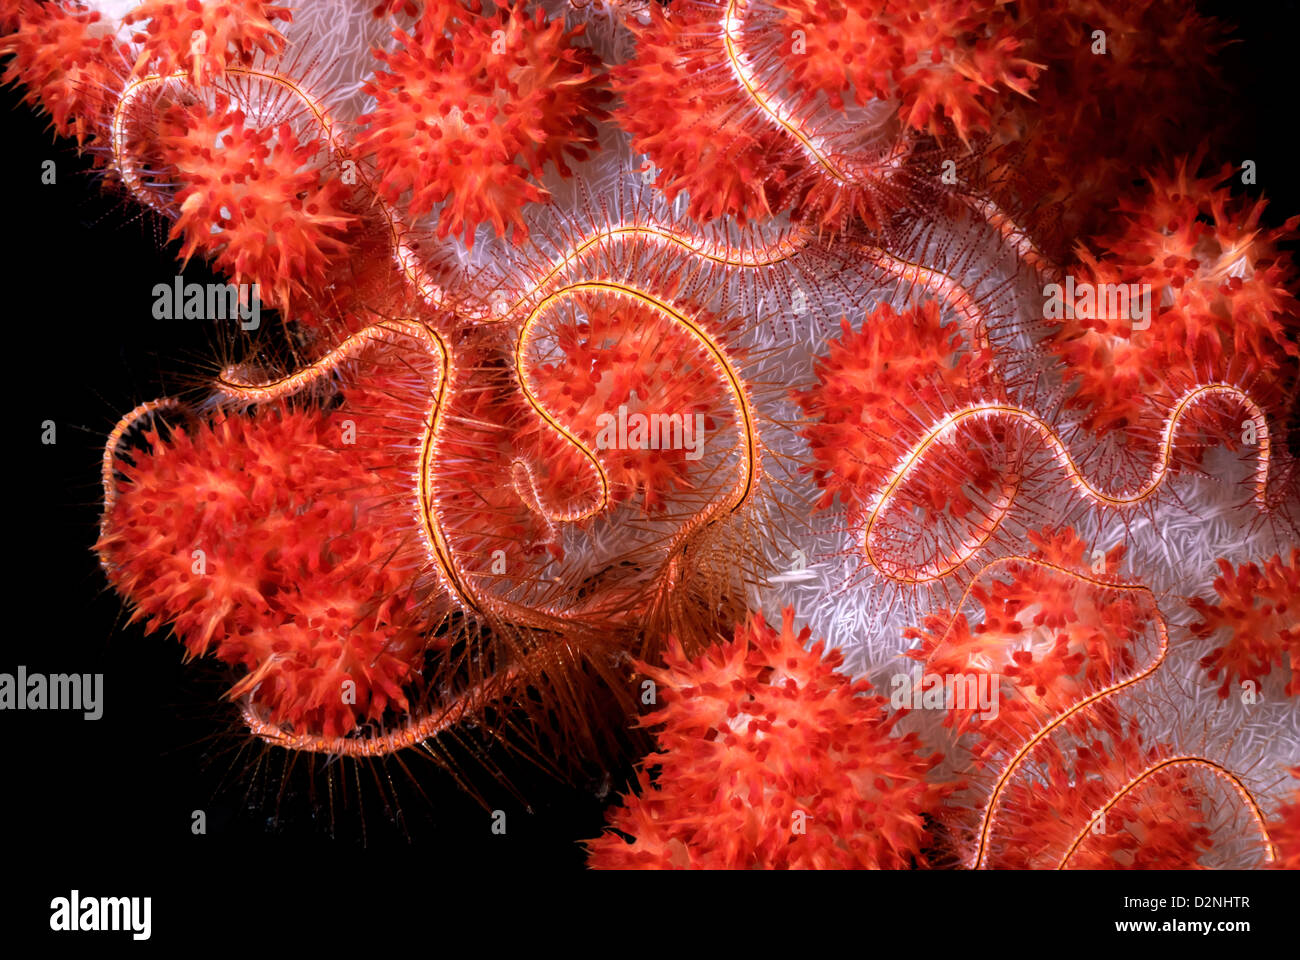 Brittle star Ophiothrix purpurea feeding or scavenging on Soft Coral Dendronephthya, Coral Sea, Pacific Ocean, Papua New Guinea Stock Photo